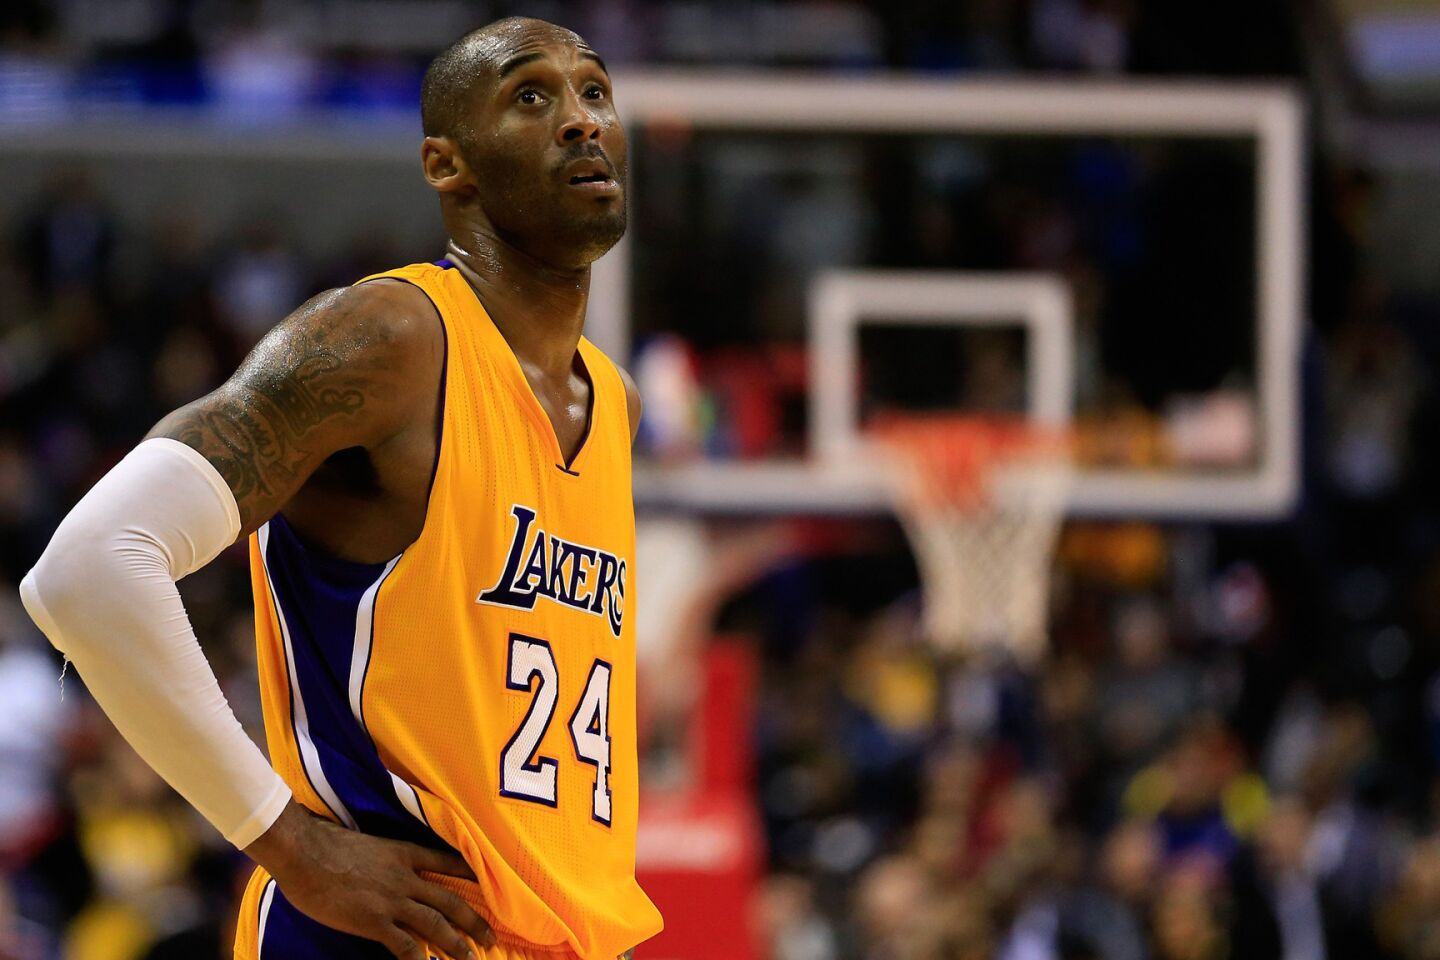 Lakers' Kobe Bryant opts for season-ending surgery, but he'll be